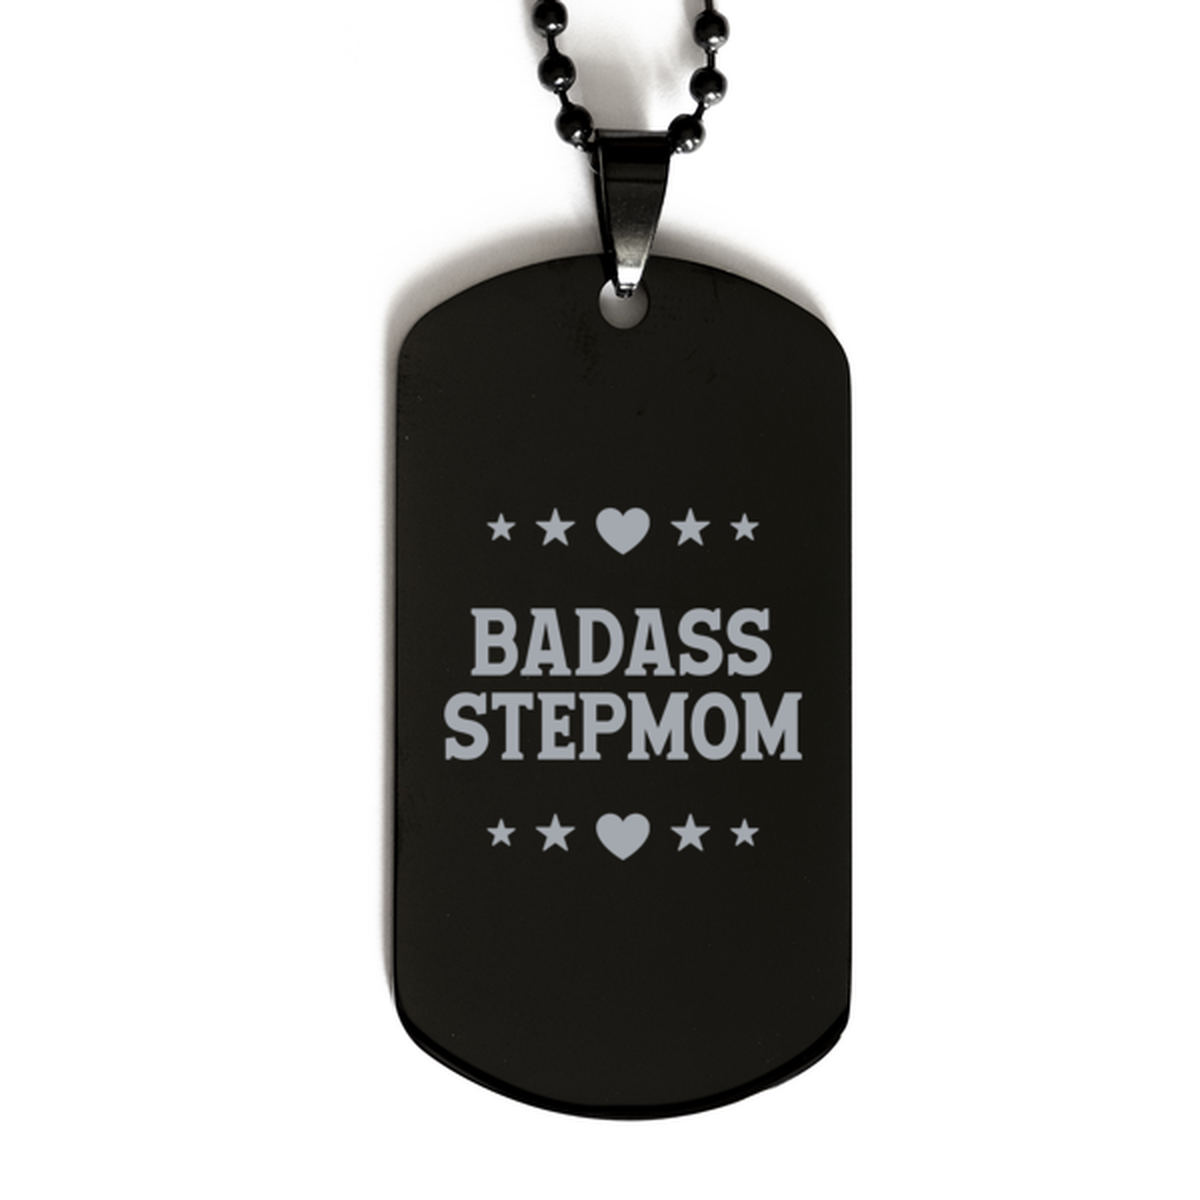 Stepmom Black Dog Tag, Badass Stepmom, Funny Family Gifts  Necklace For Stepmom From Son Daughter